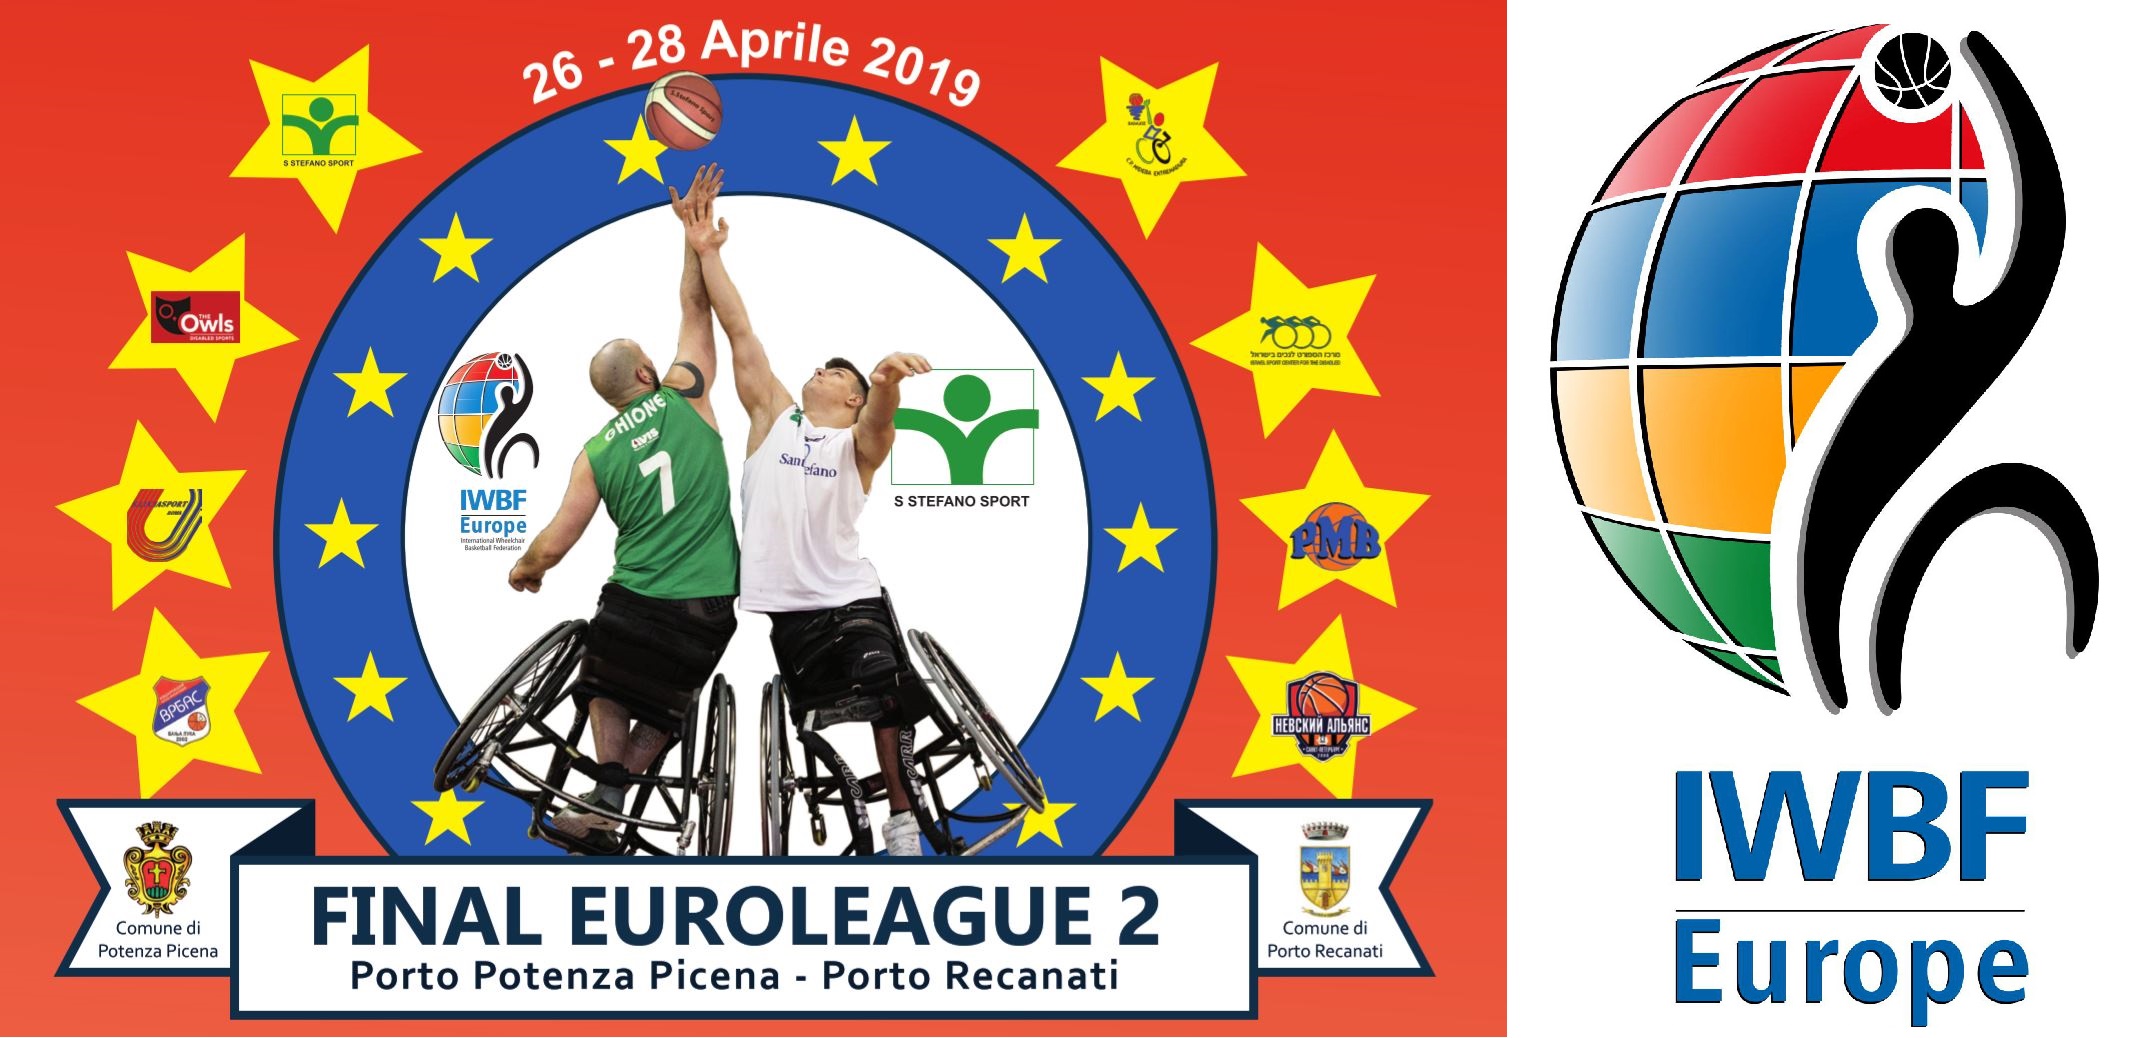 IWBF-Europe | Competitions